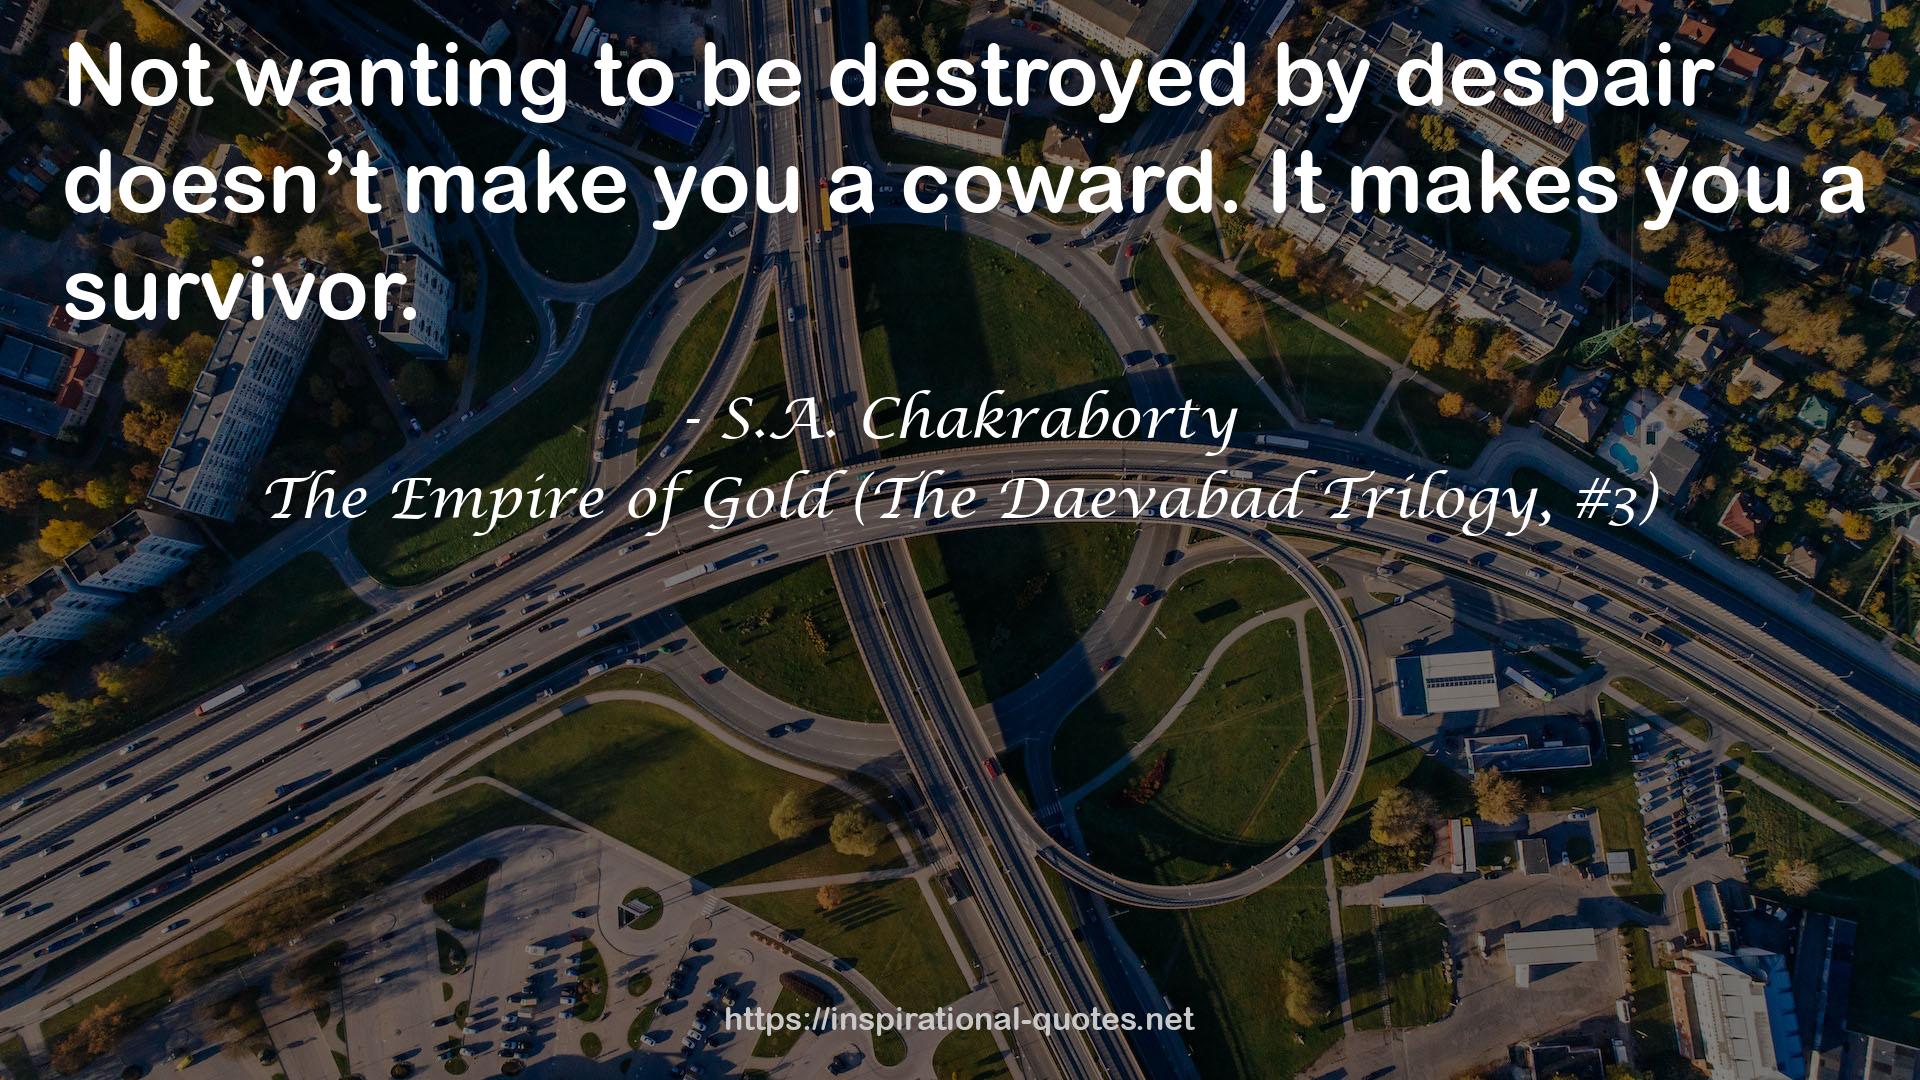 The Empire of Gold (The Daevabad Trilogy, #3) QUOTES